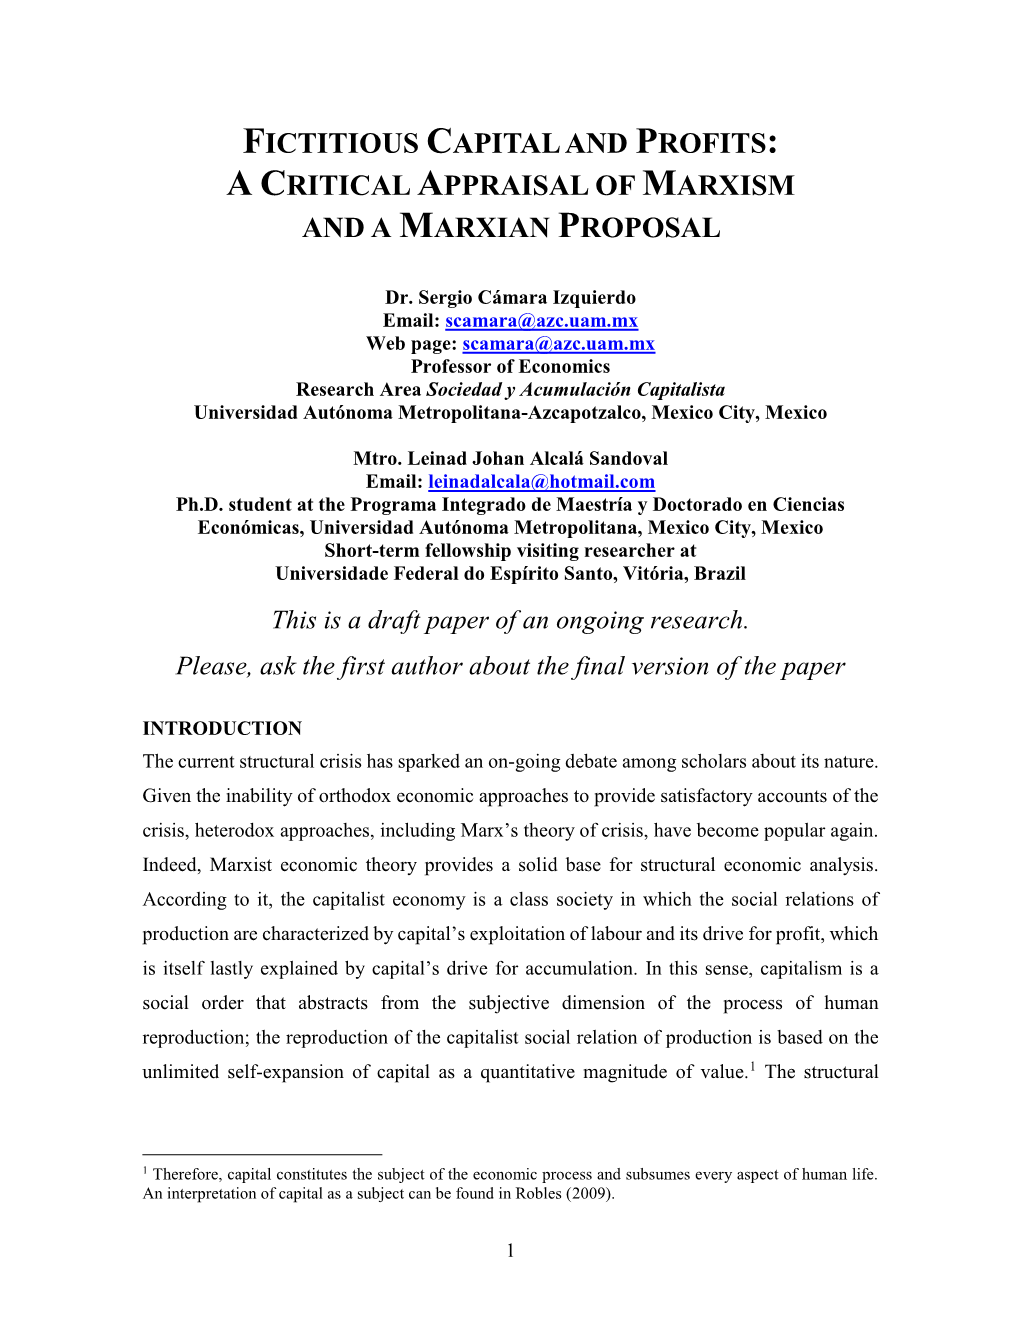 Fictitious Capital and Profits: a Critical Appraisal of Marxism and a Marxian Proposal